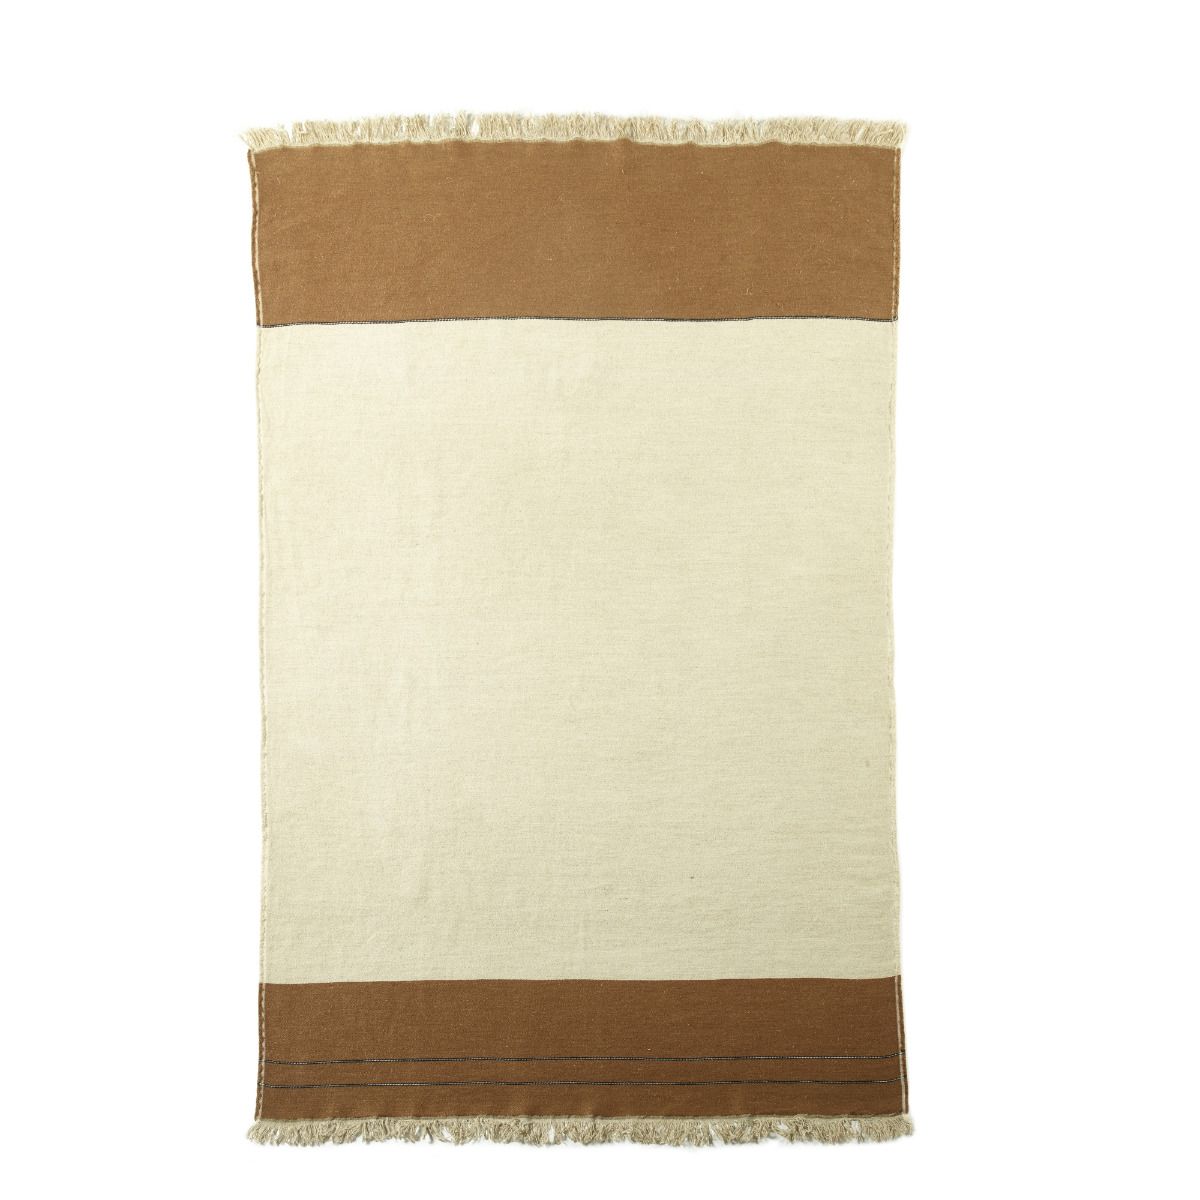 THE BROWNHOUSE INTERIORS LIBECO-LINEN GUS STRIPE THROW